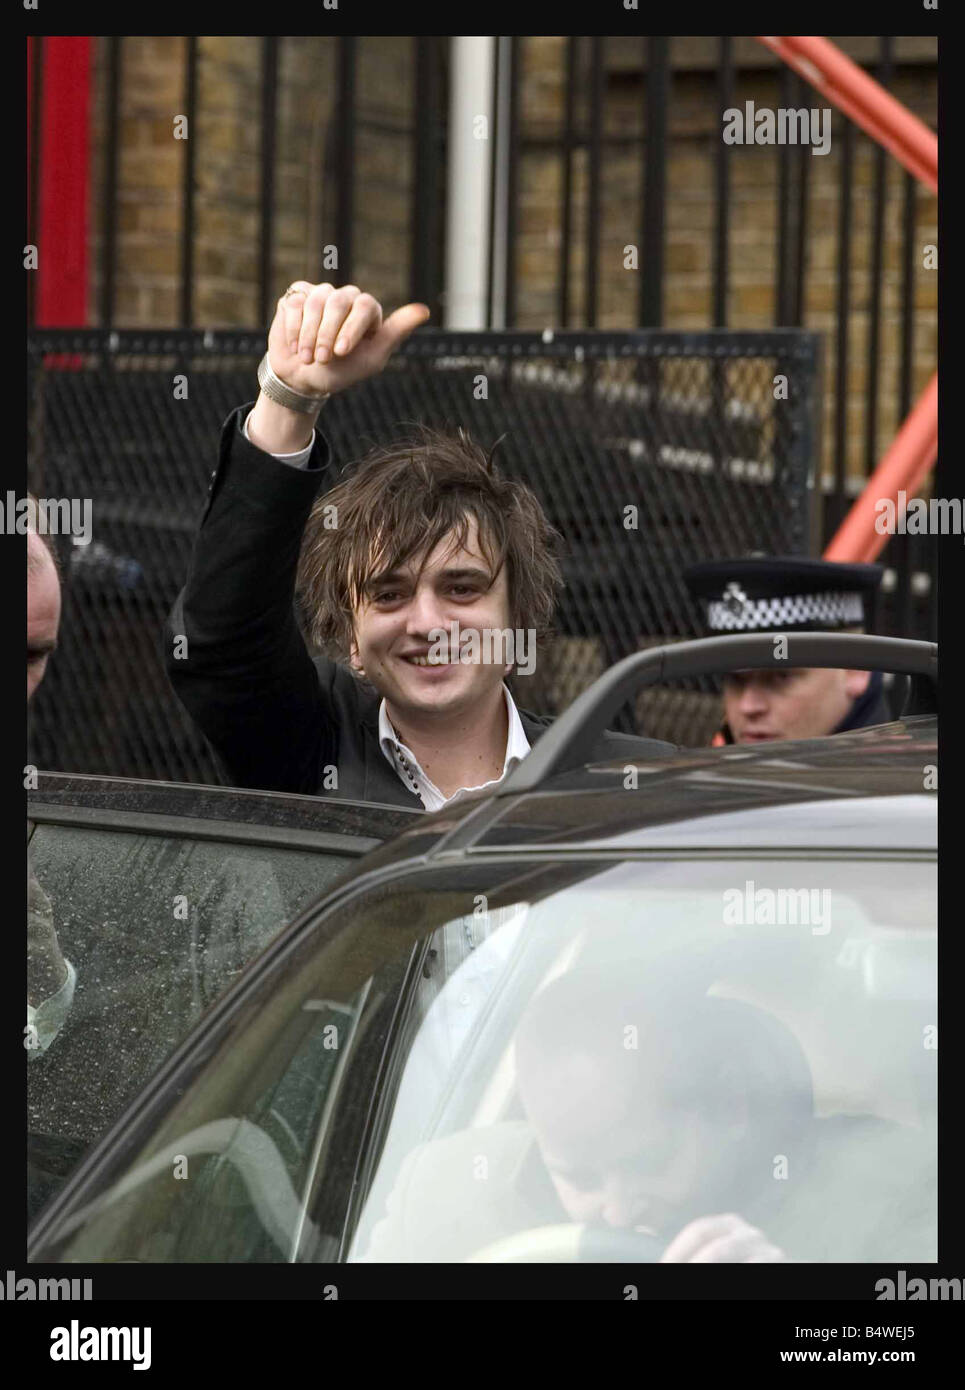 Babyshambles singer Pete Doherty has been given a 12 month community order after admitting possession of drugs The 26 year old was sentenced at Ealing Magistrates Court Stock Photo